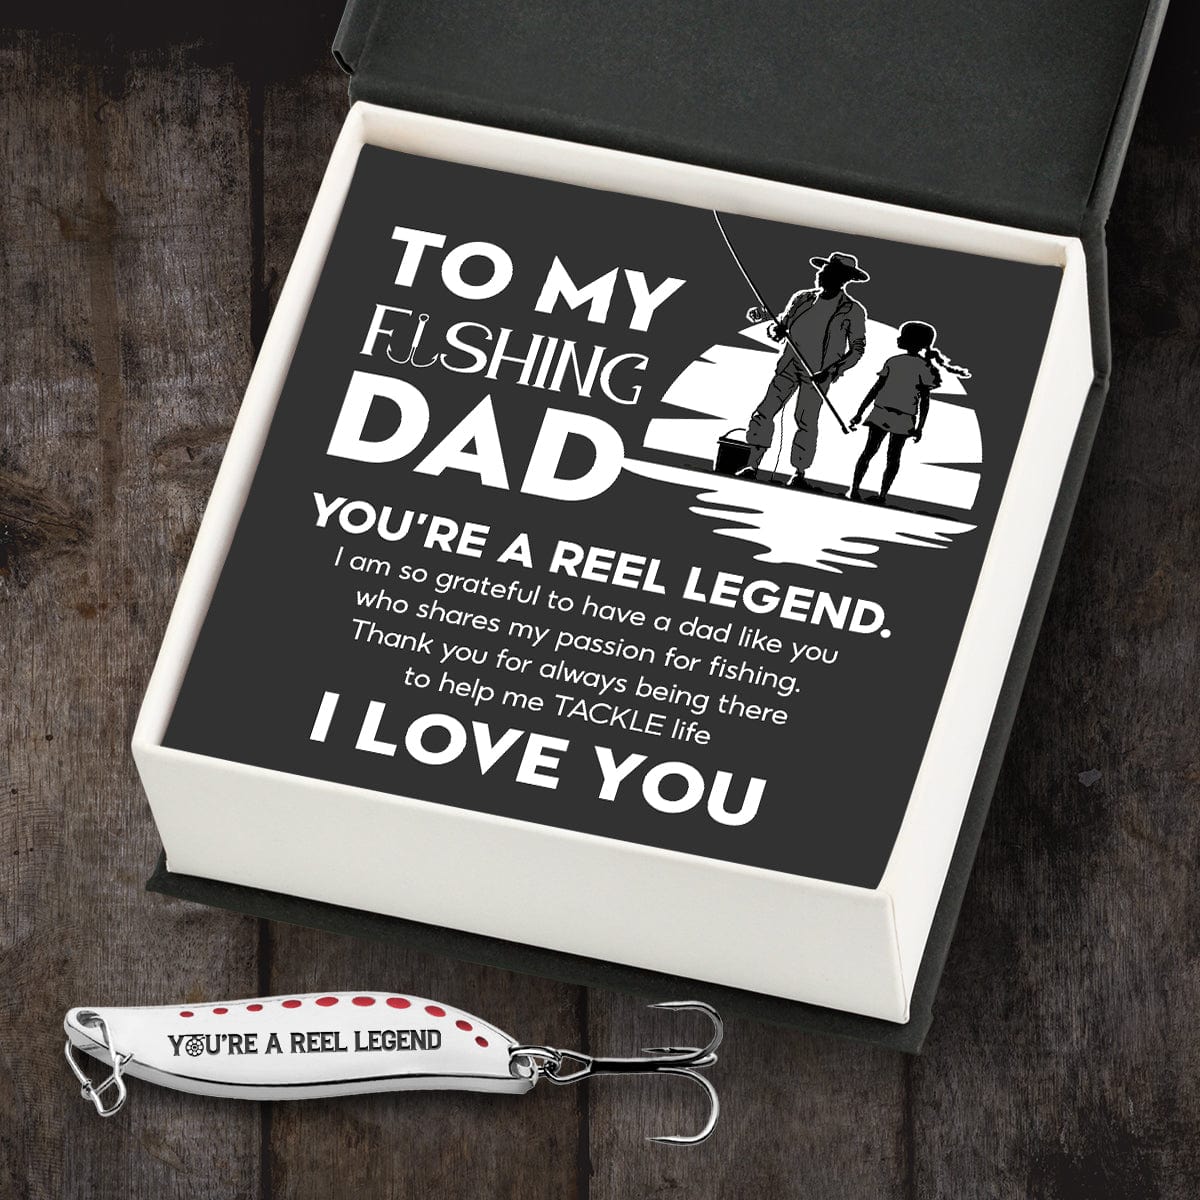 Fishing Lures - Fishing - To My Dad - You’re A Reel Legend - Gfaa18005